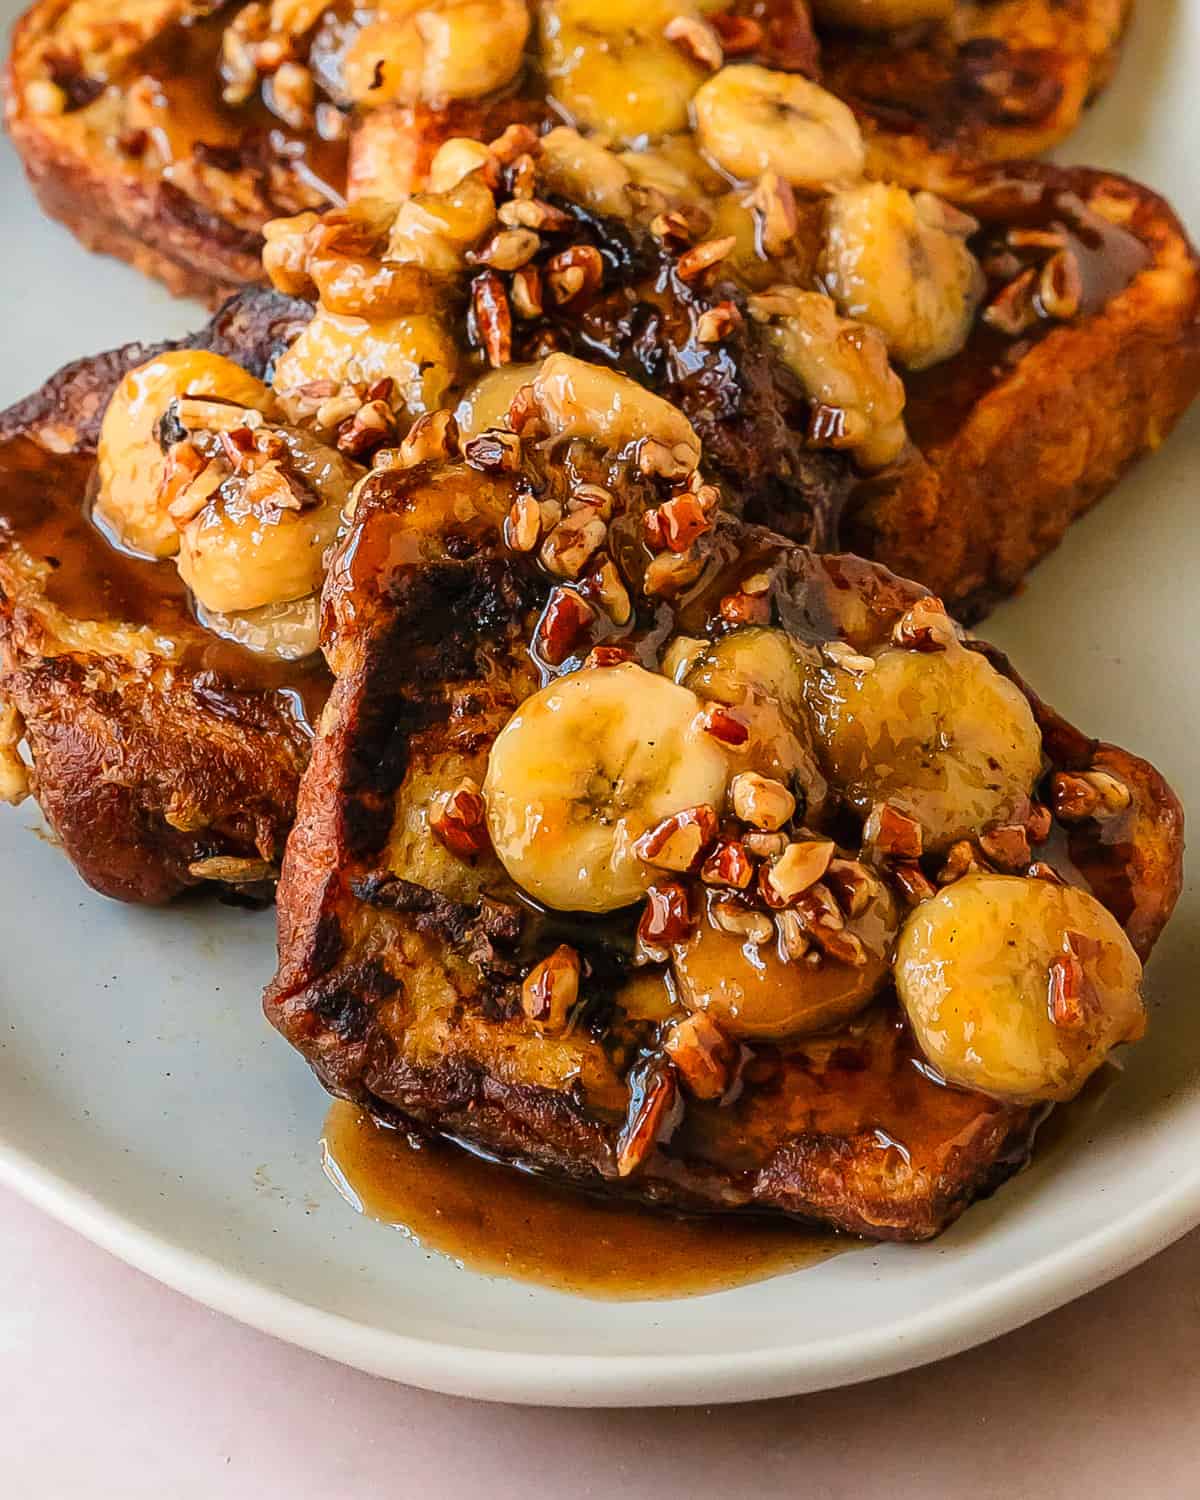  Banana french toast is a simple and decadent french toast made from buttery bread soaked in a rich banana custard, fried to golden perfection. It’s topped with caramelized bananas and chopped nuts. This quick and easy french toast with bananas makes the perfect indulgent breakfast or brunch.